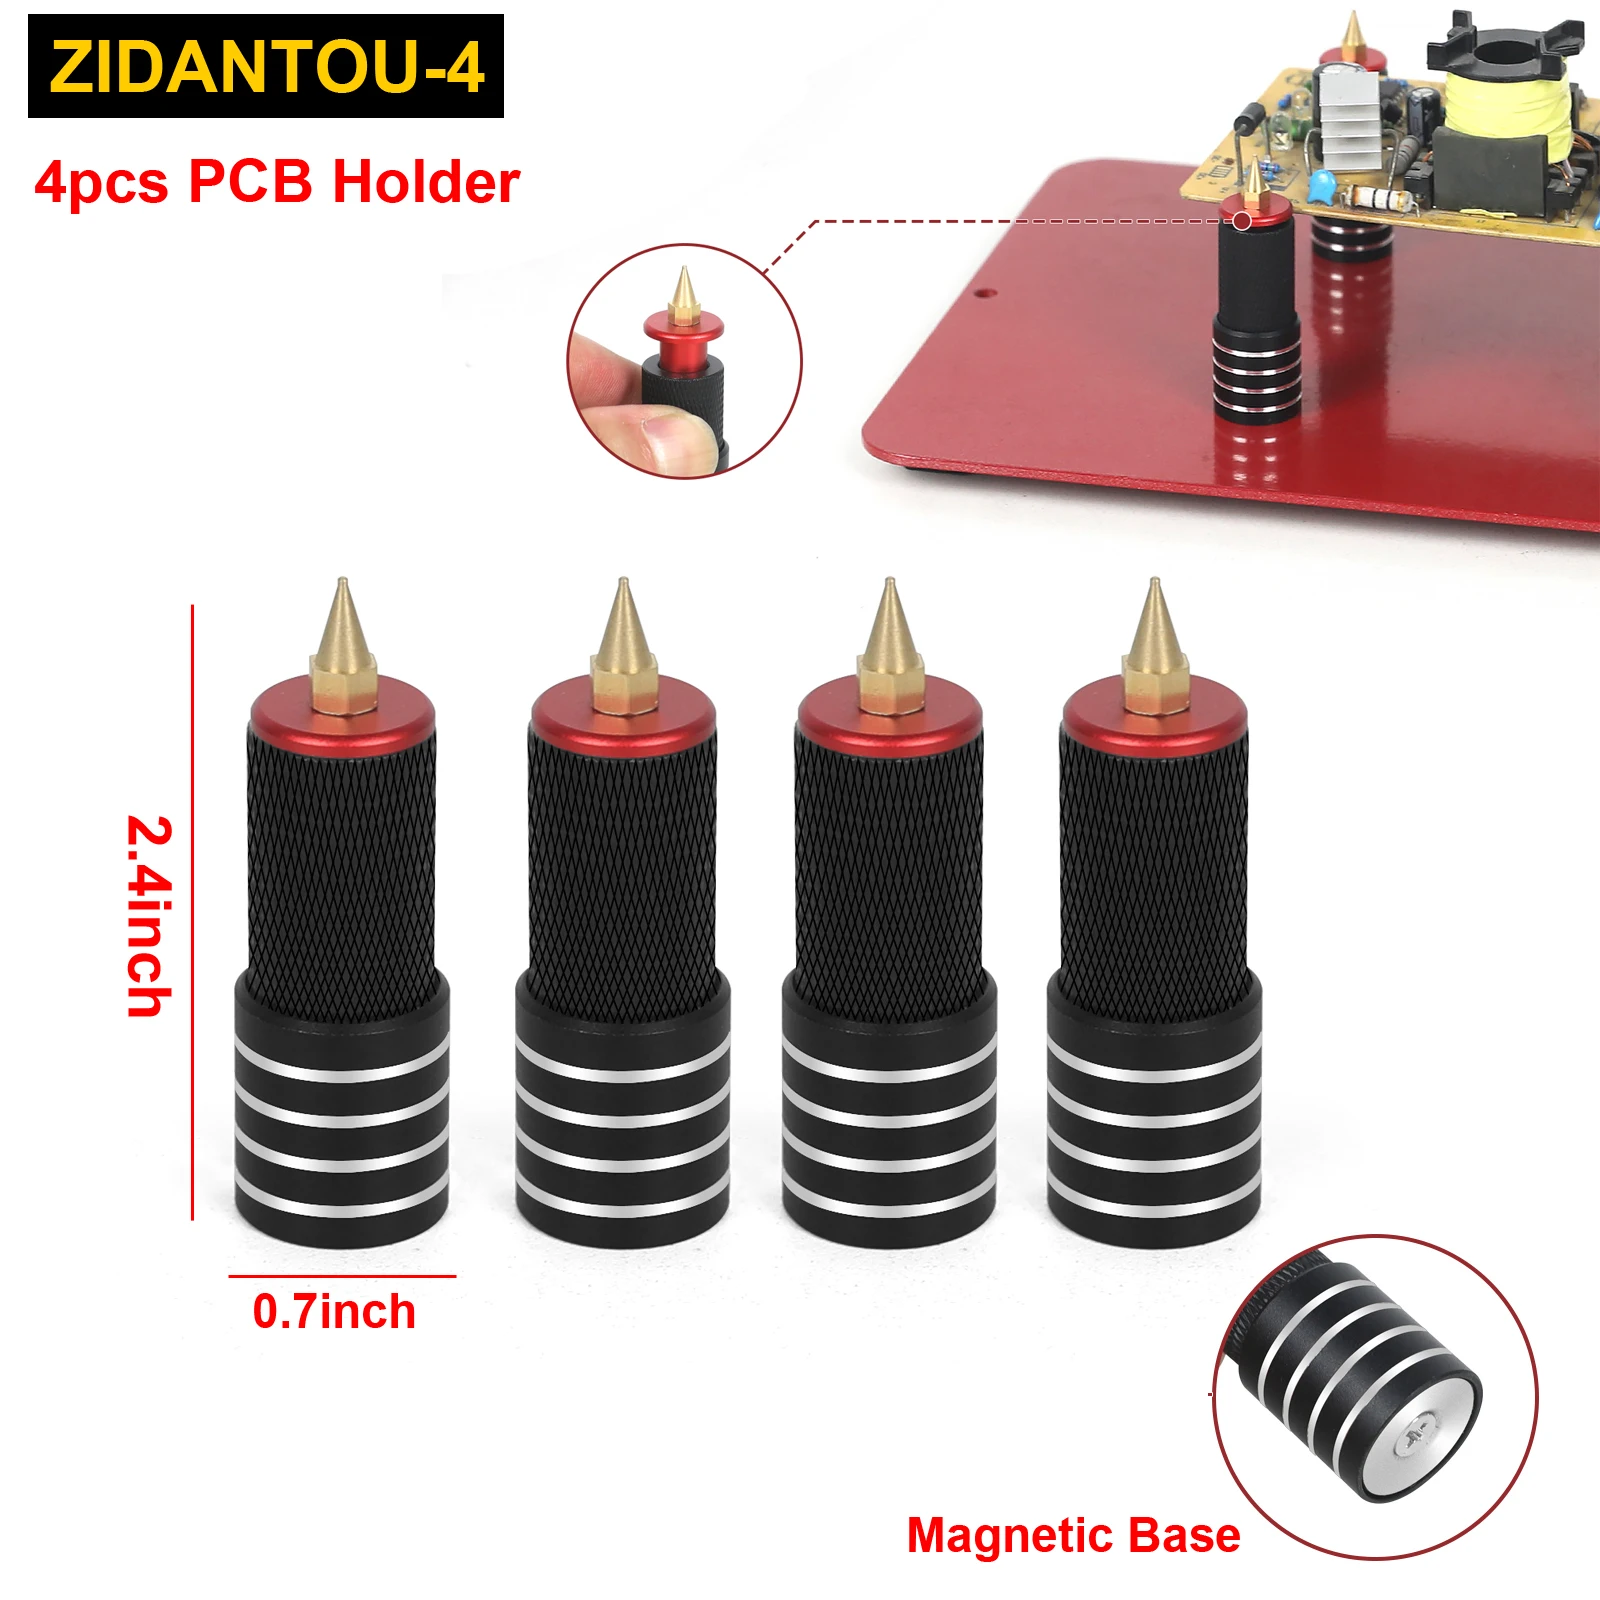 NEWACALOX Soldering Third Hand Tool PCB Holder with Magnetic 4Pcs Flexib... - $62.19